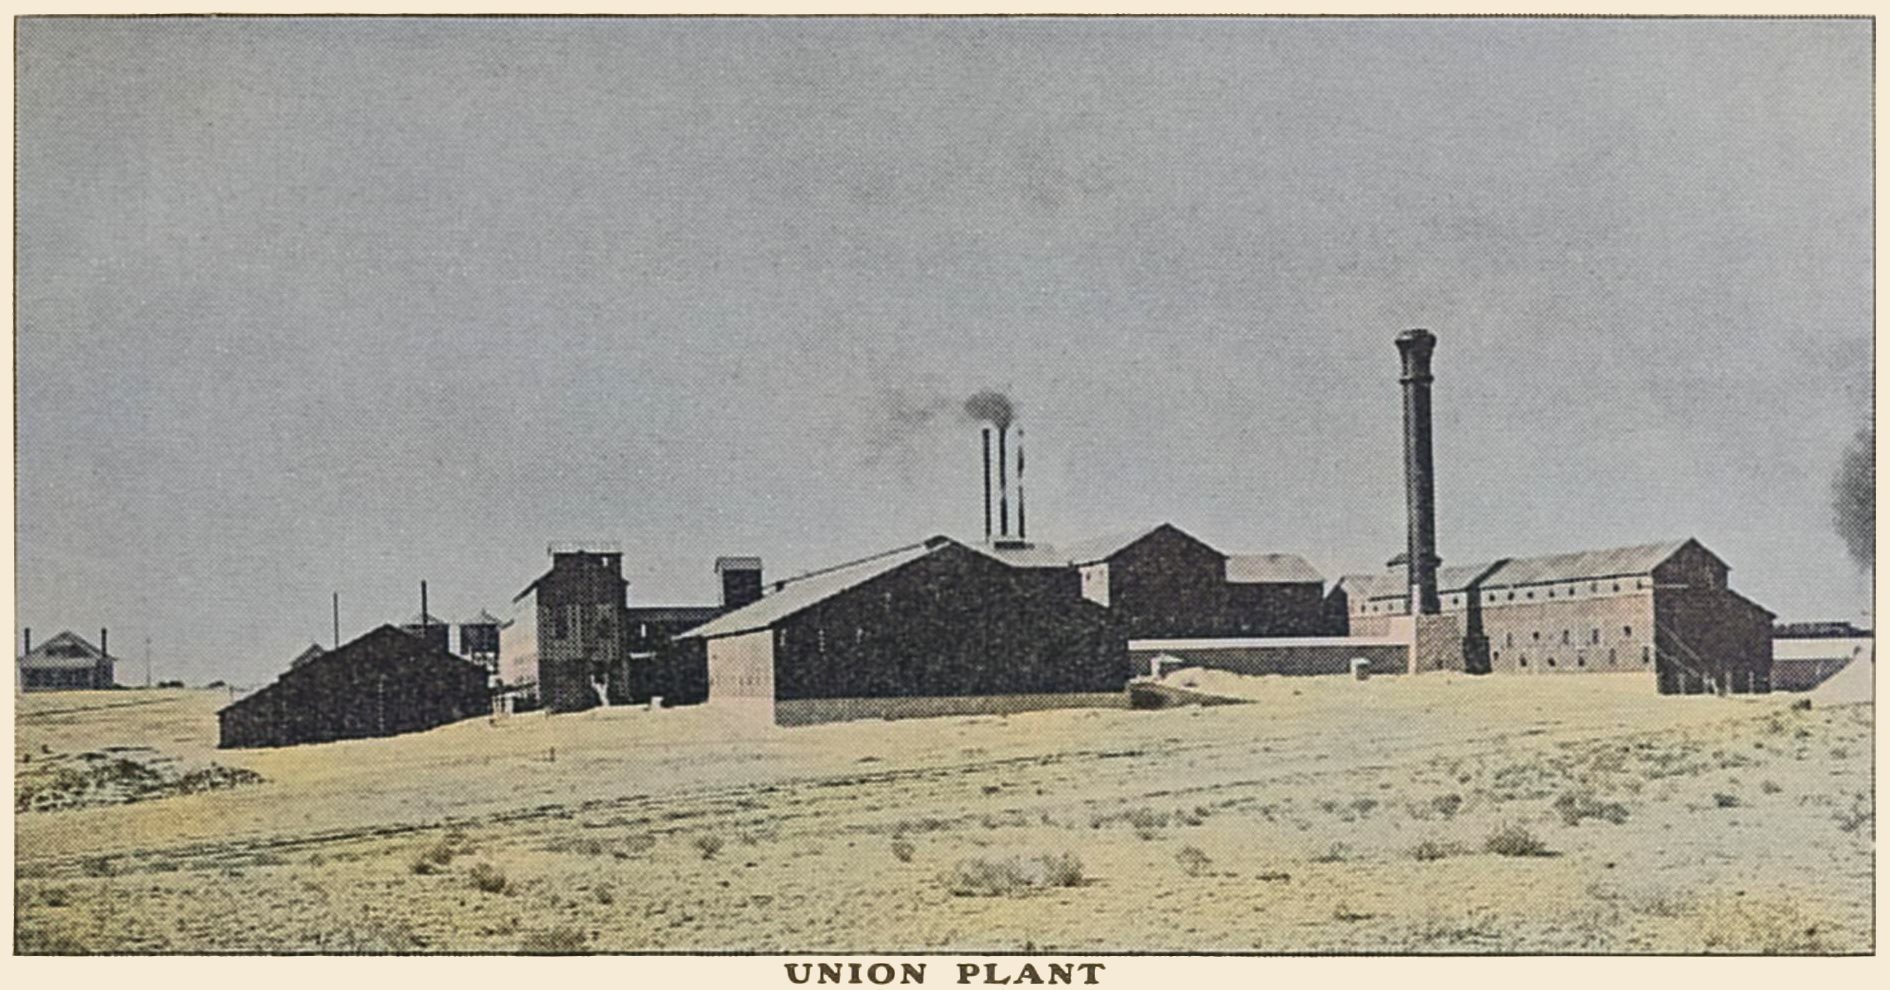 Union Plant of U.S. Reduction and Refining Company